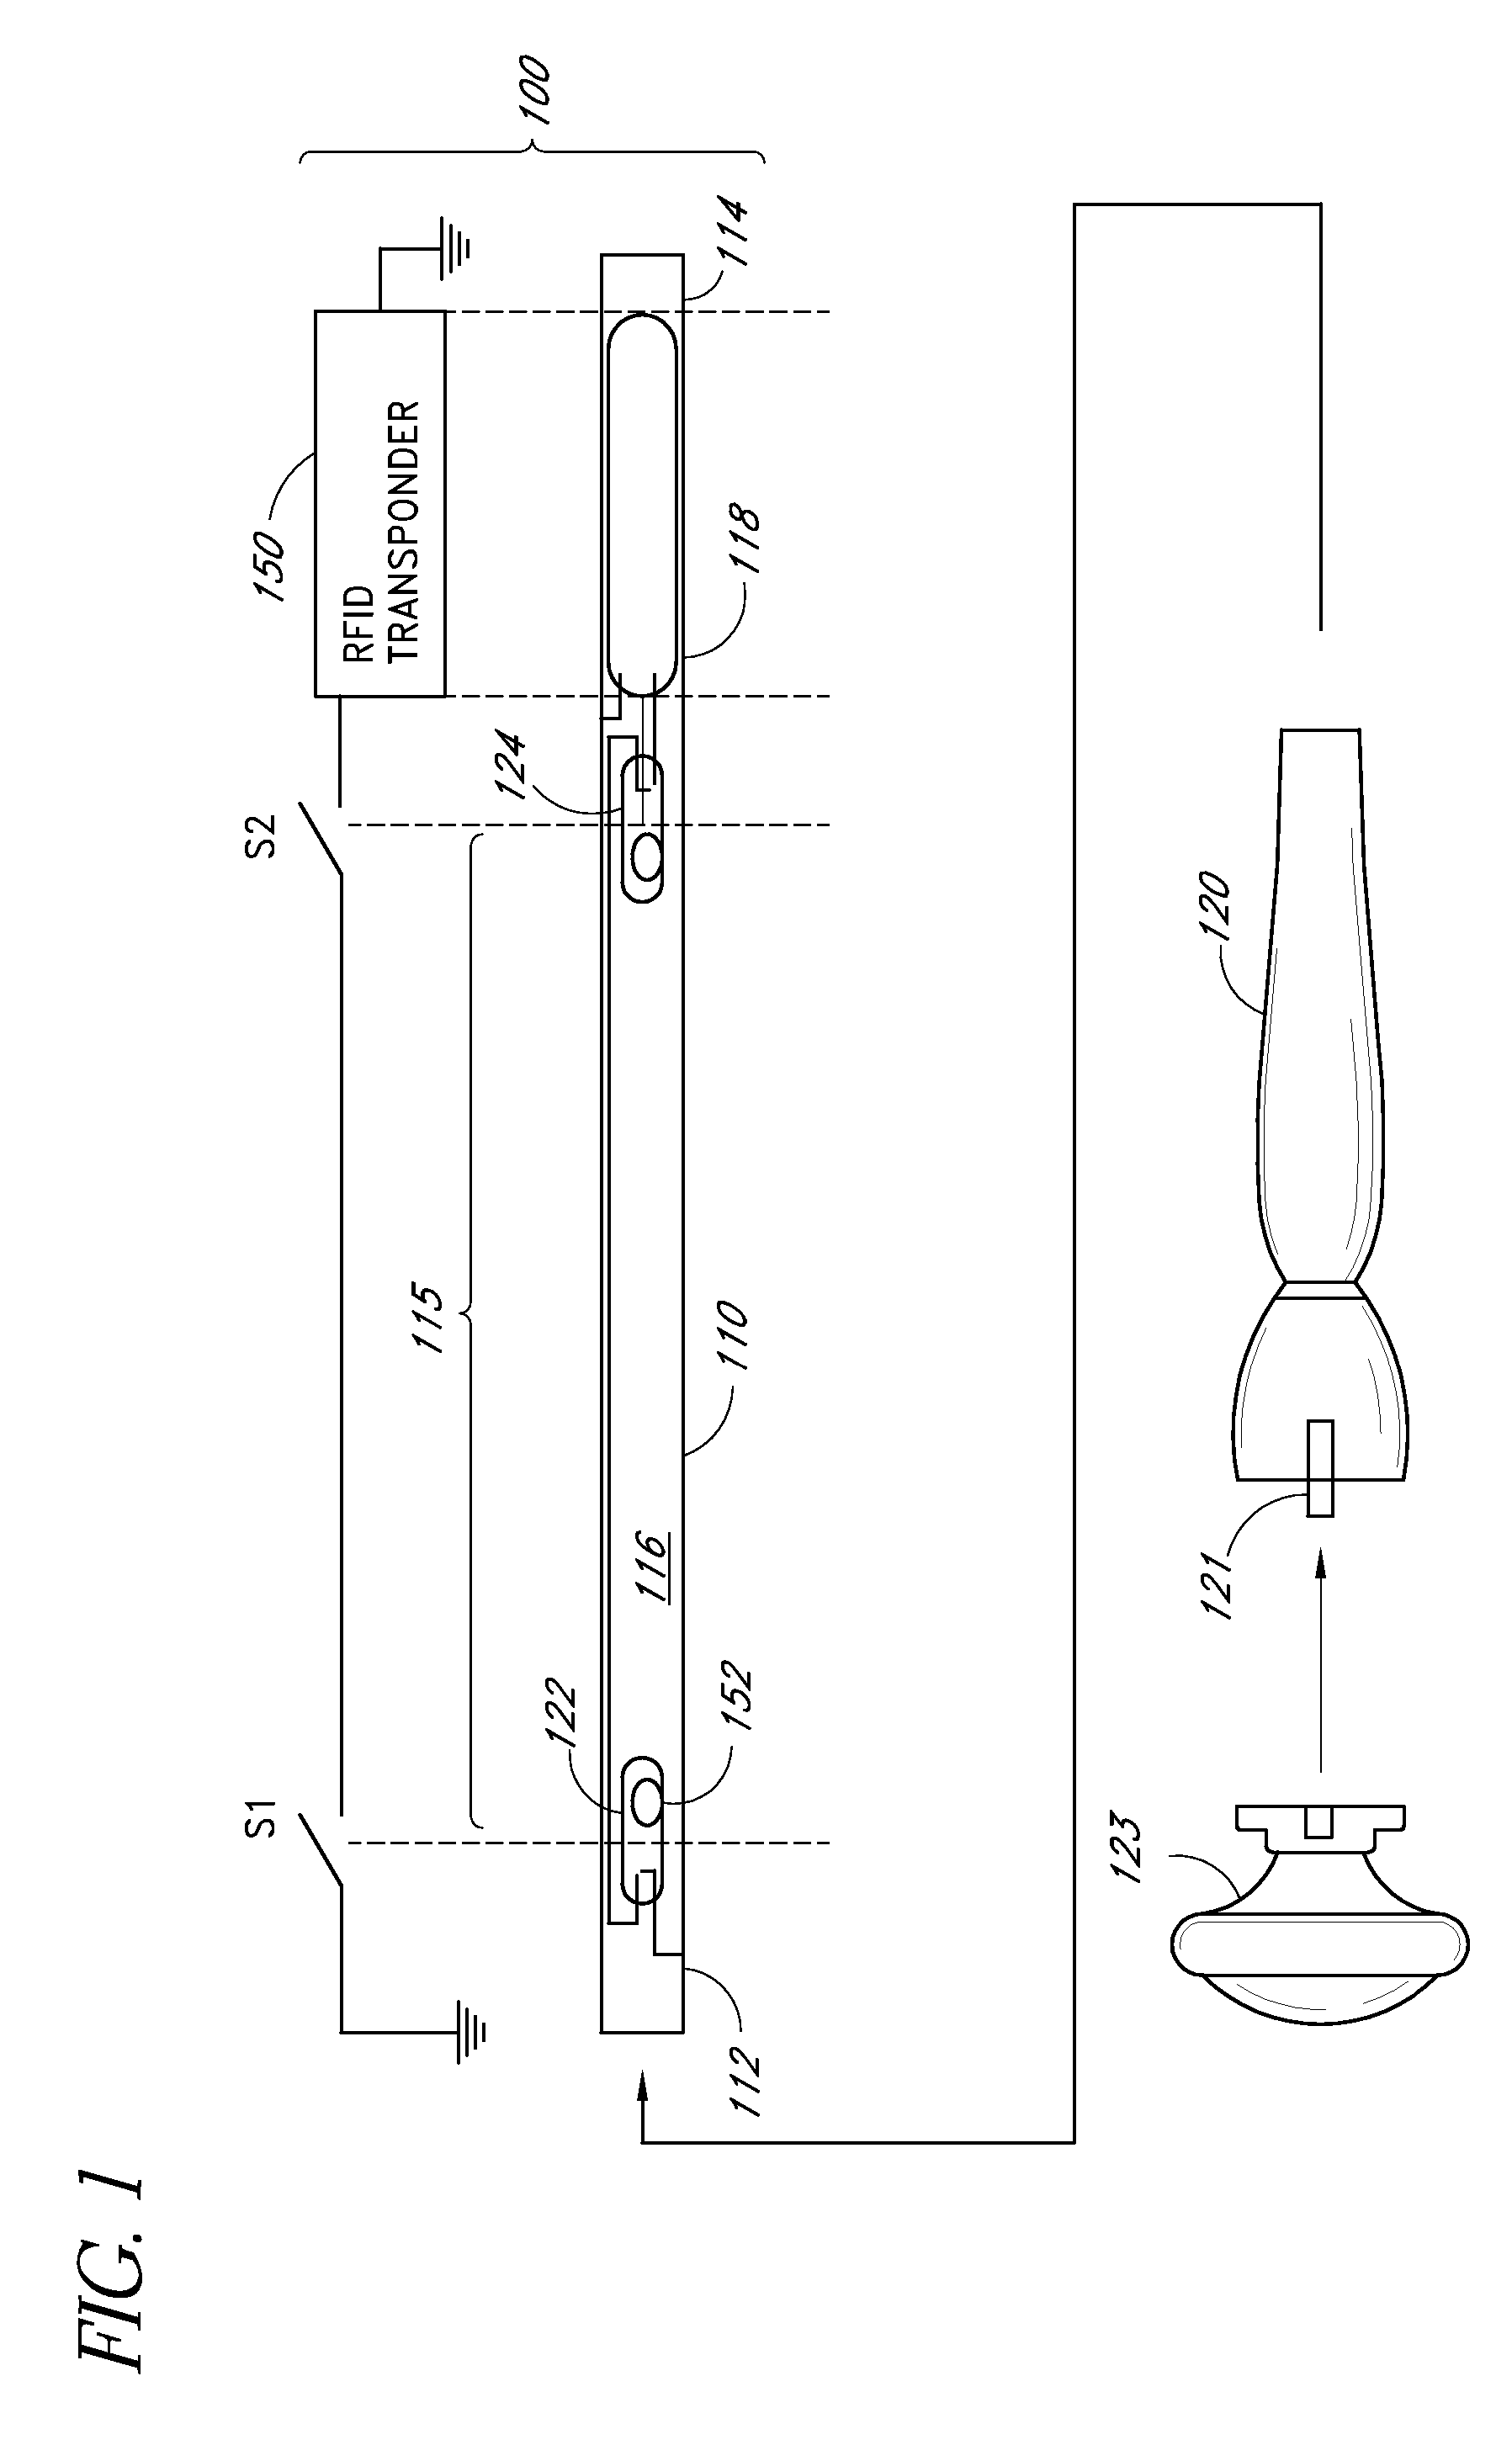 Apparatus and methods for providing interactive entertainment